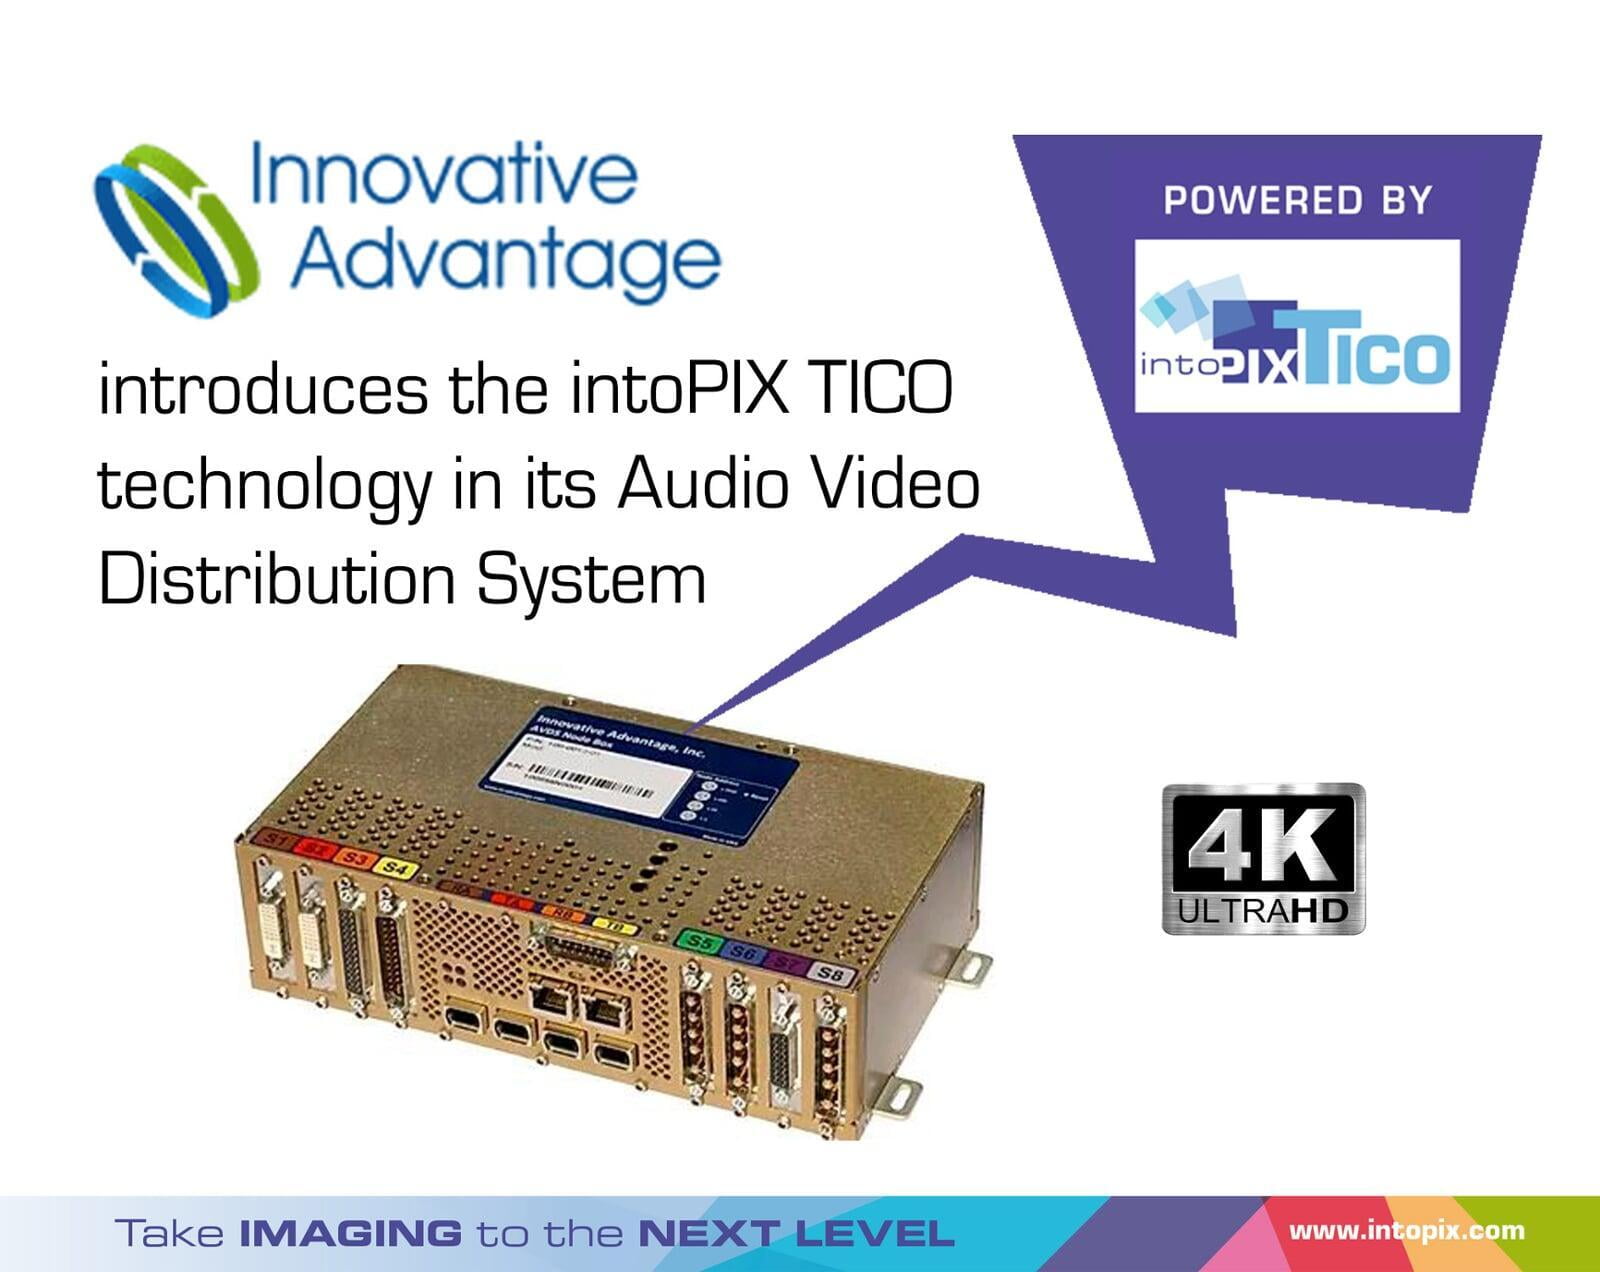 Innovative Advantage upgrades streams from HD to 4K in business jets with the intoPIX TICO RDD35 Technology 